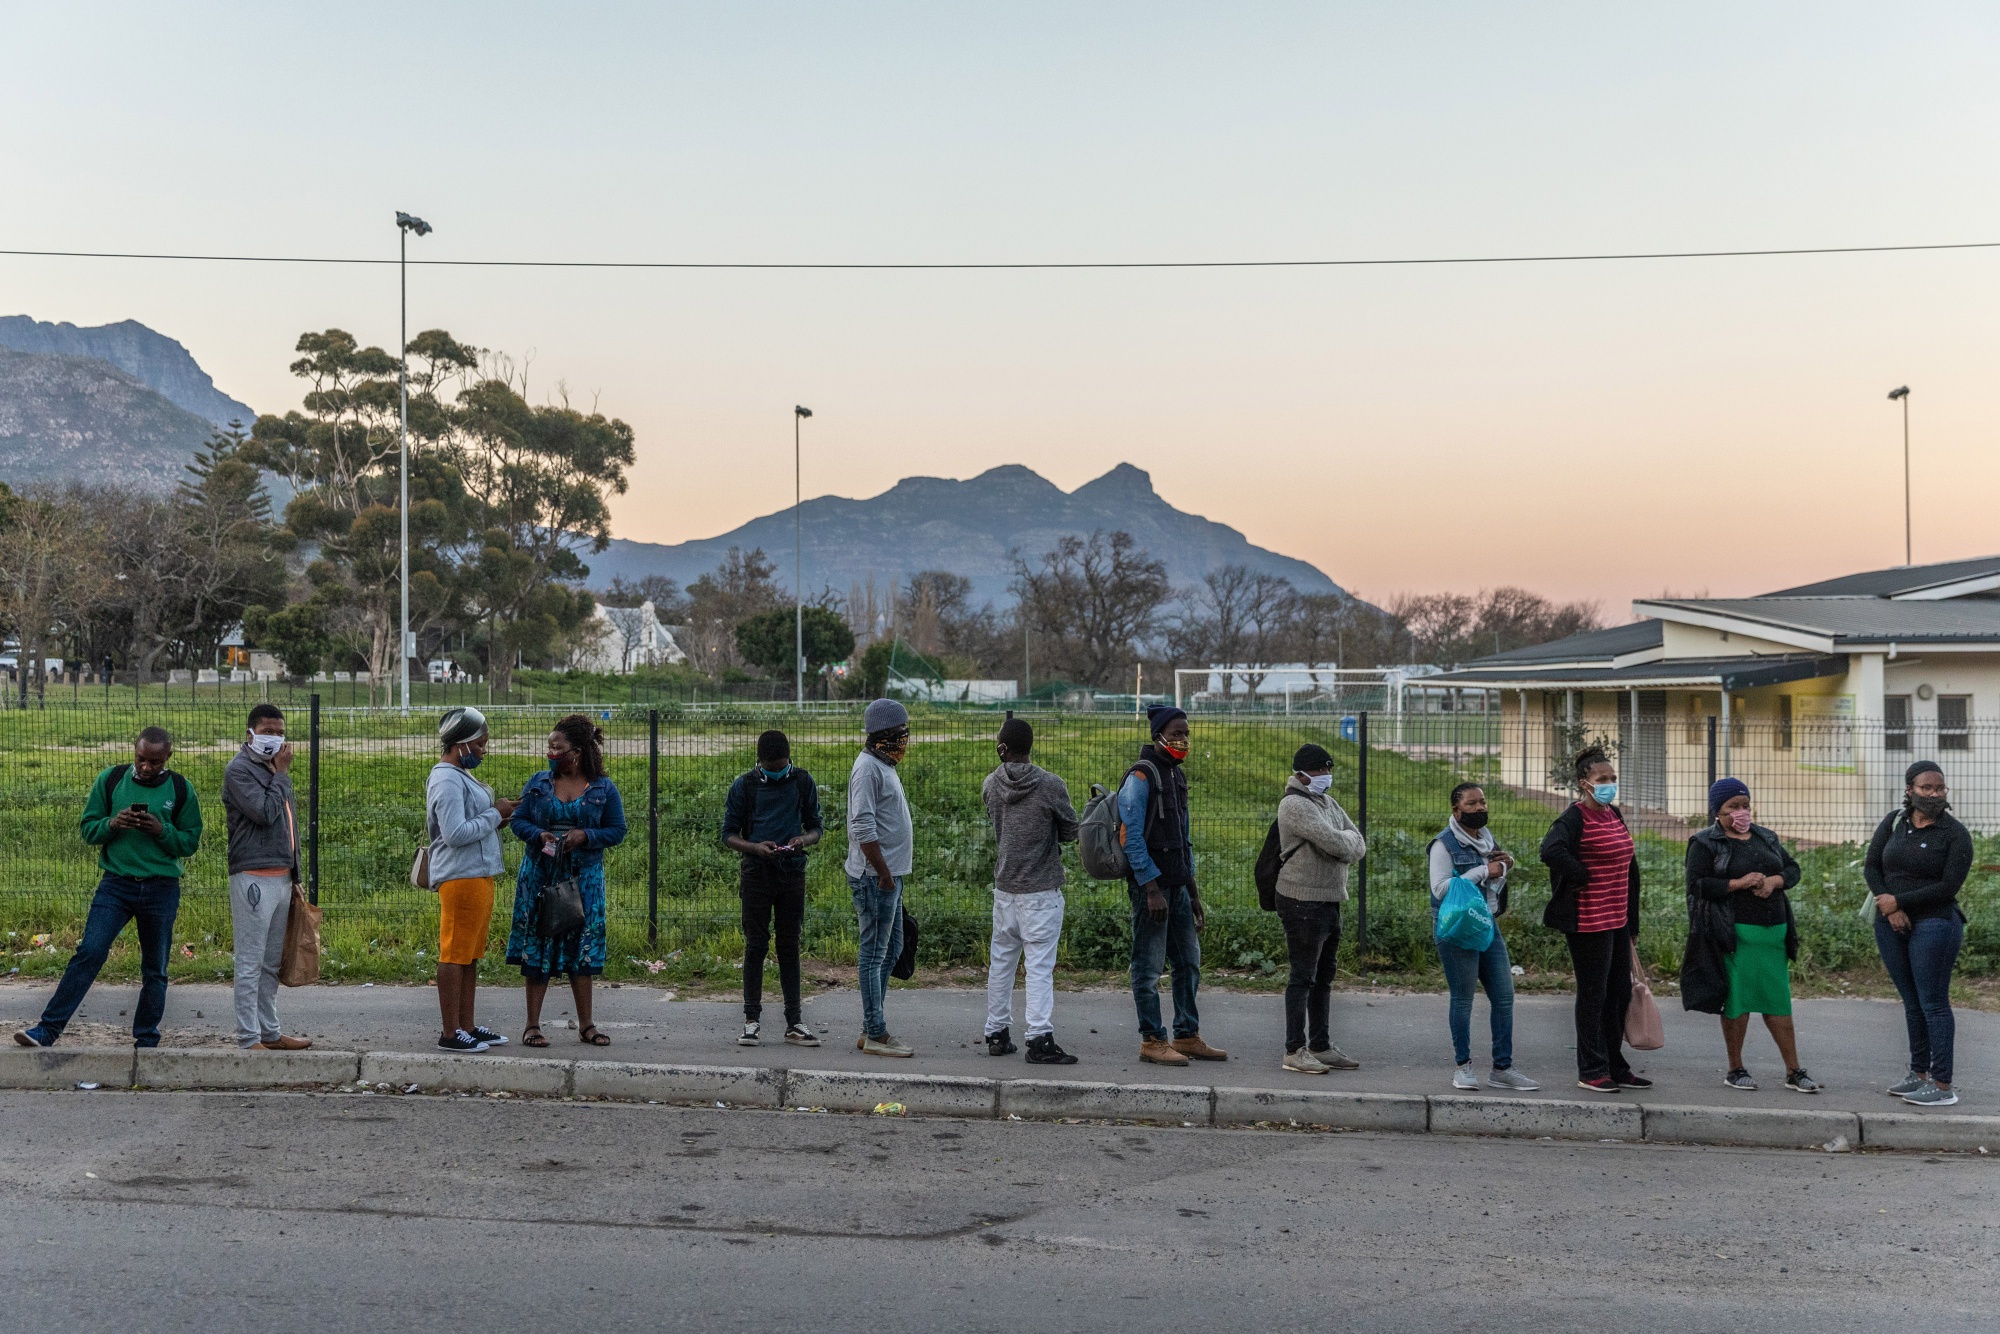 Local residents wearing protective face masks wait at a bus stop in the Imizamo Yethu township area of Hout Bay, in Cape Town.